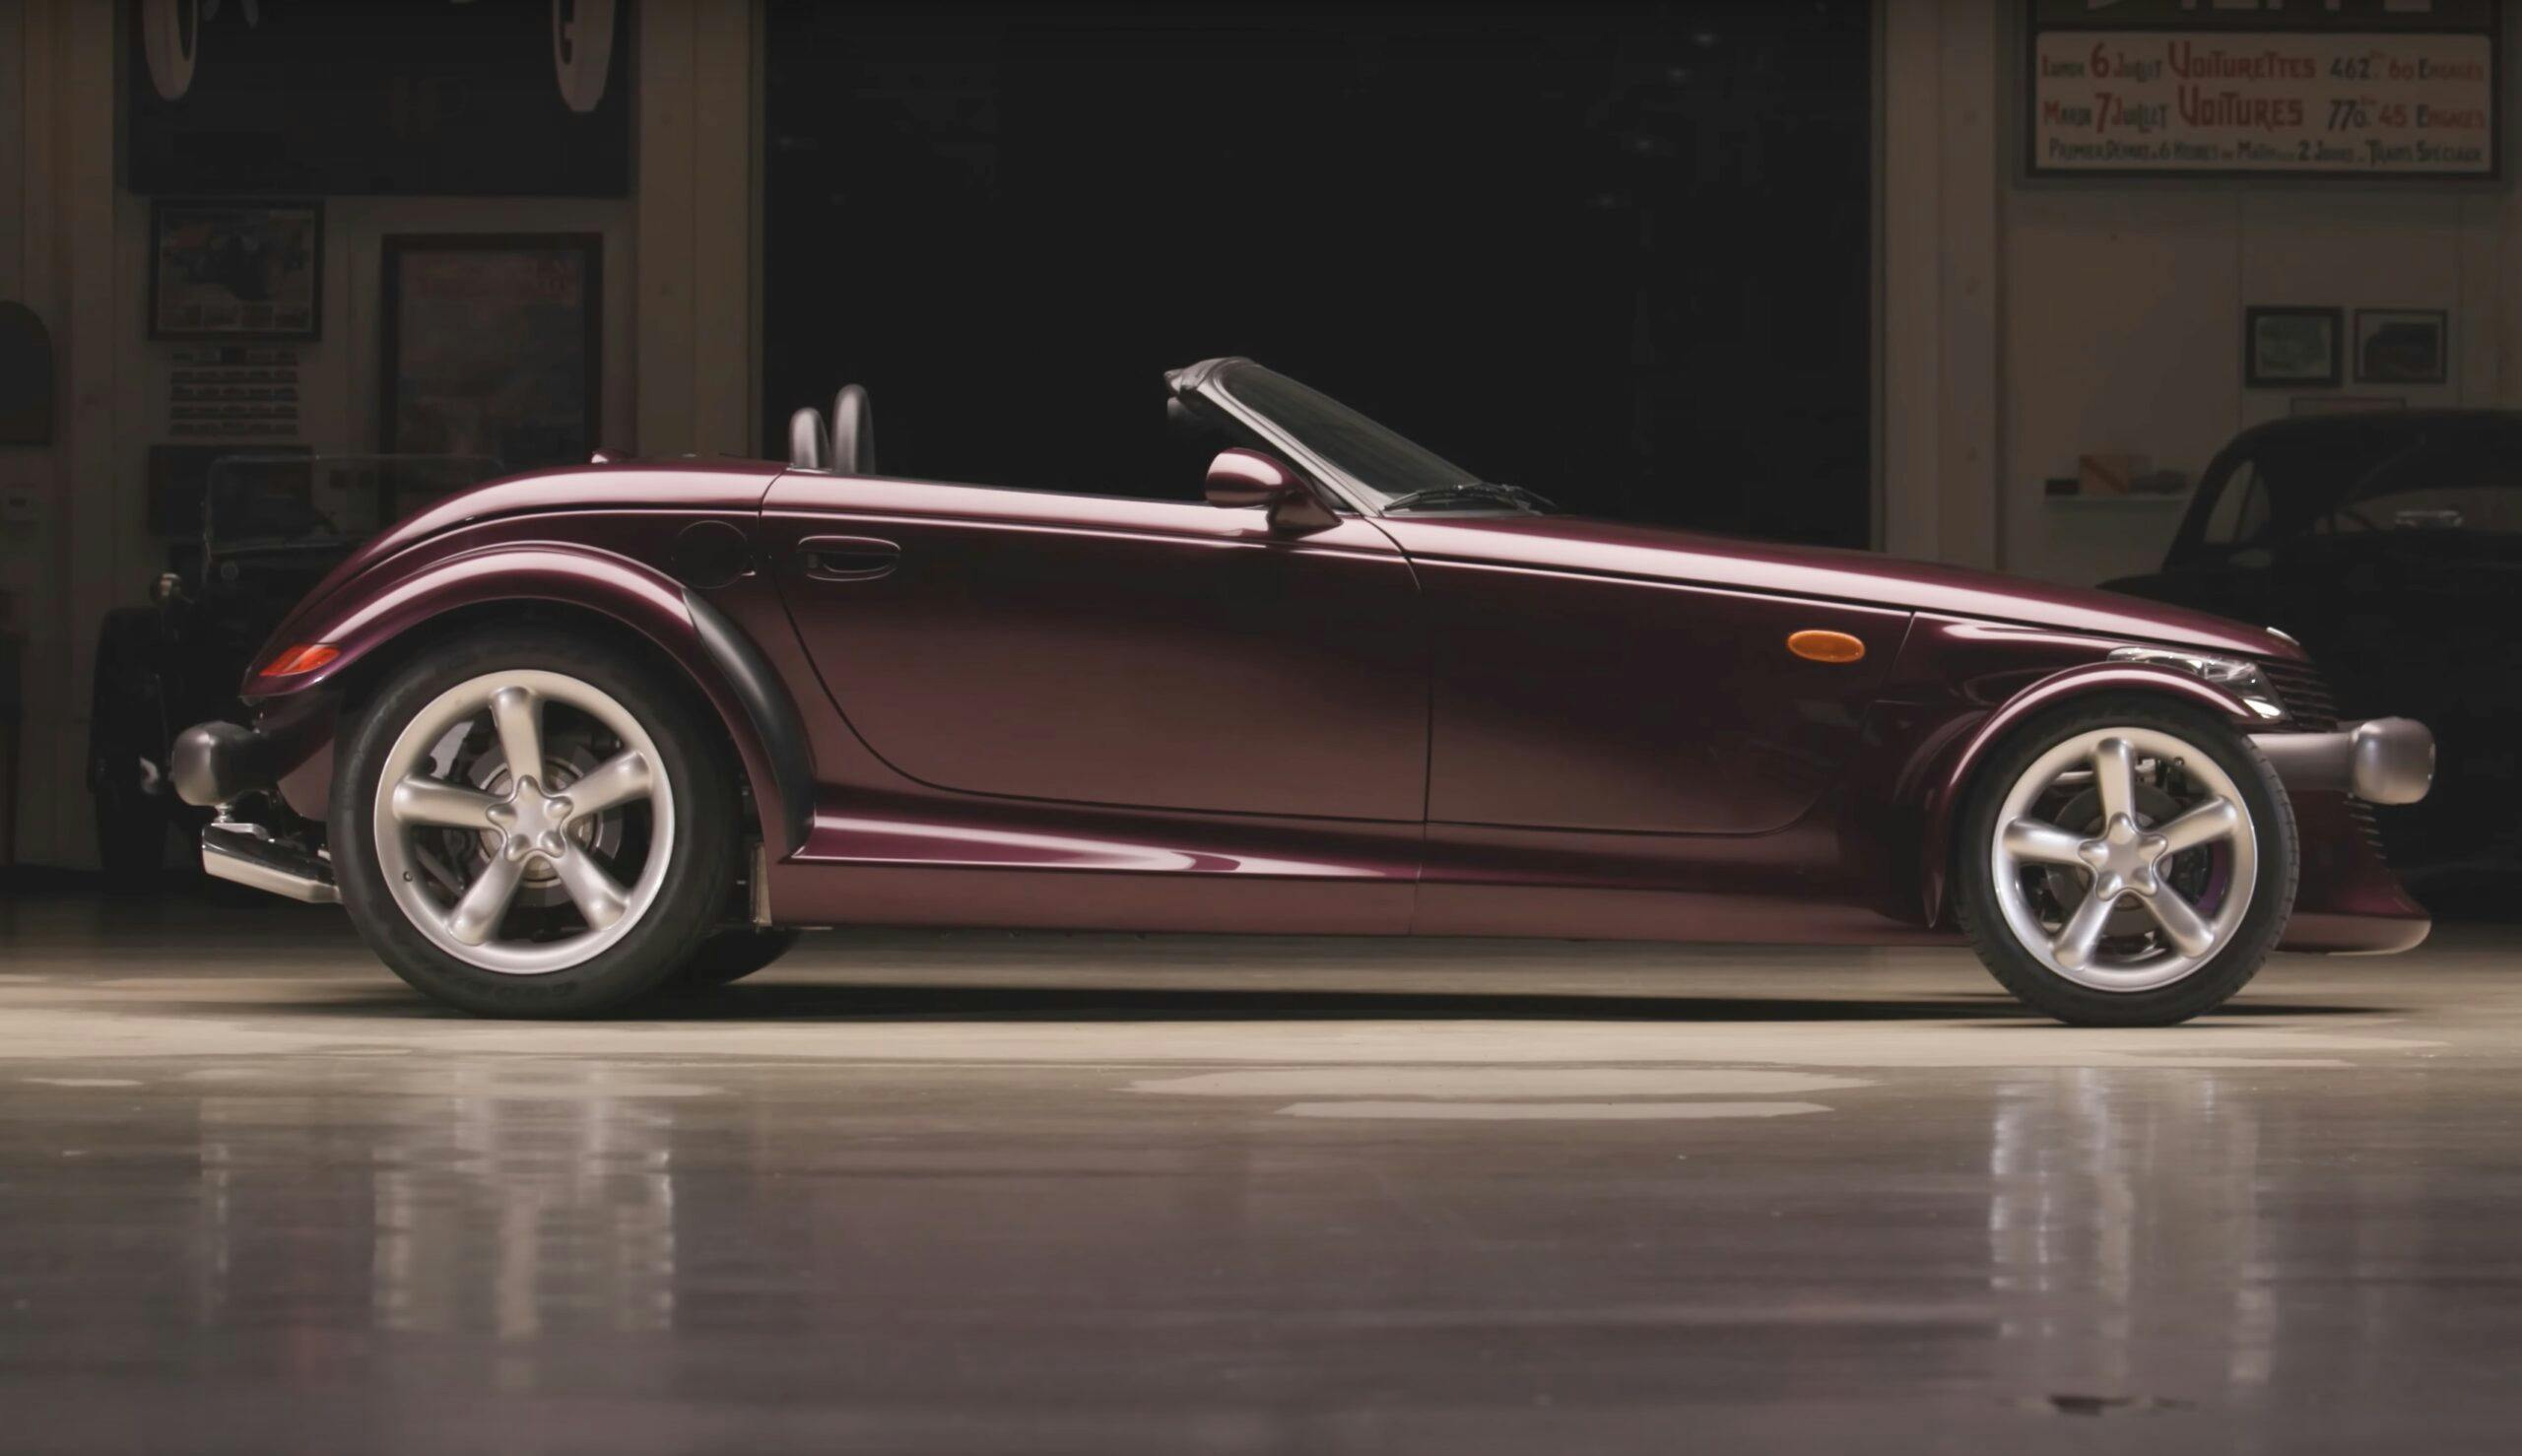 Plymouth Prowler profile